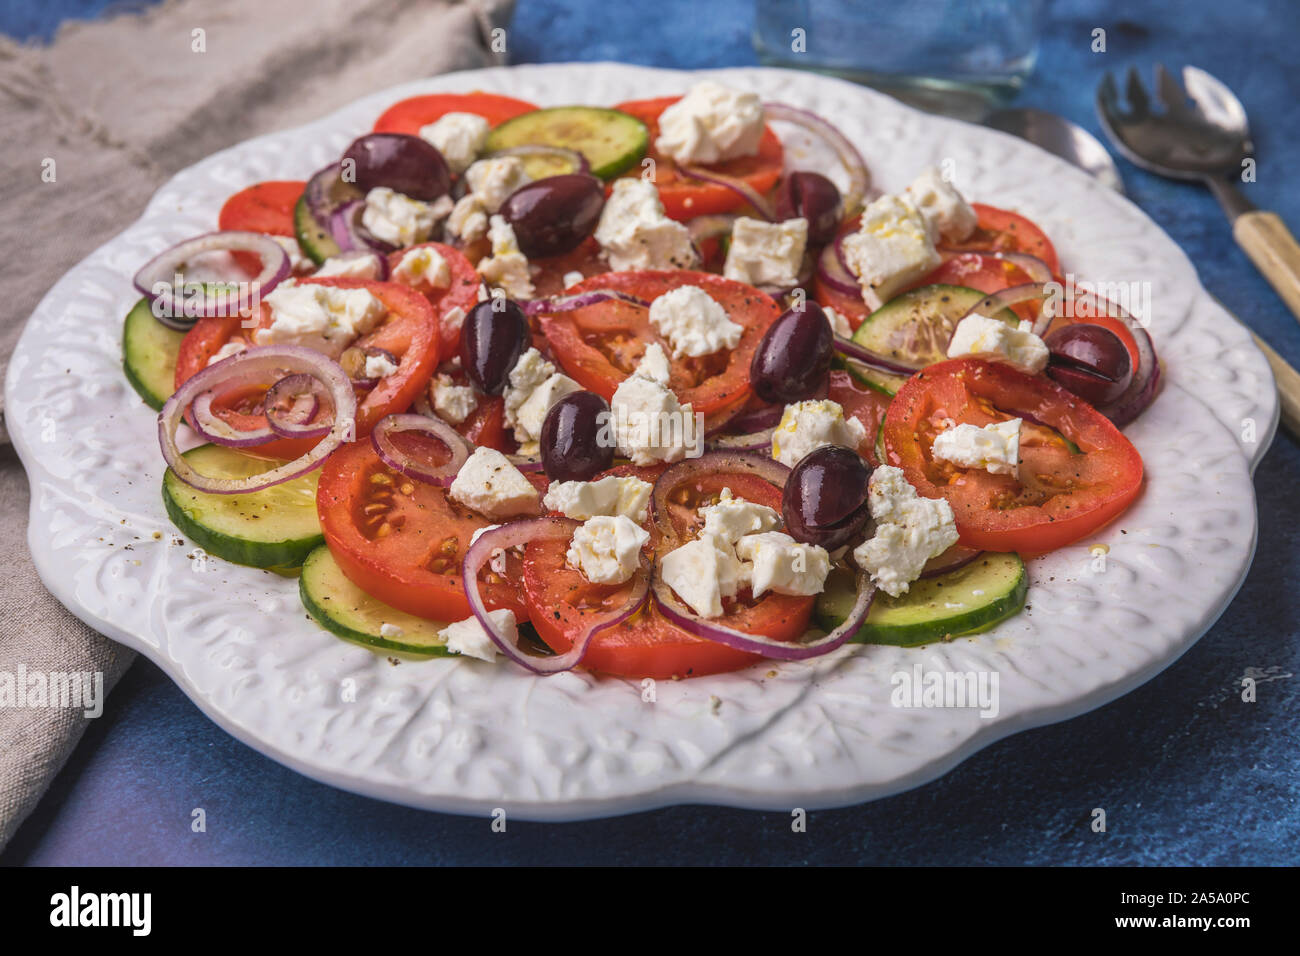 A fresh healthy salad with tomatoes, cucumber, red onion, feta cheese and kalamata olives. The salad is on a beautiful white plate on a blue backgroun Stock Photo